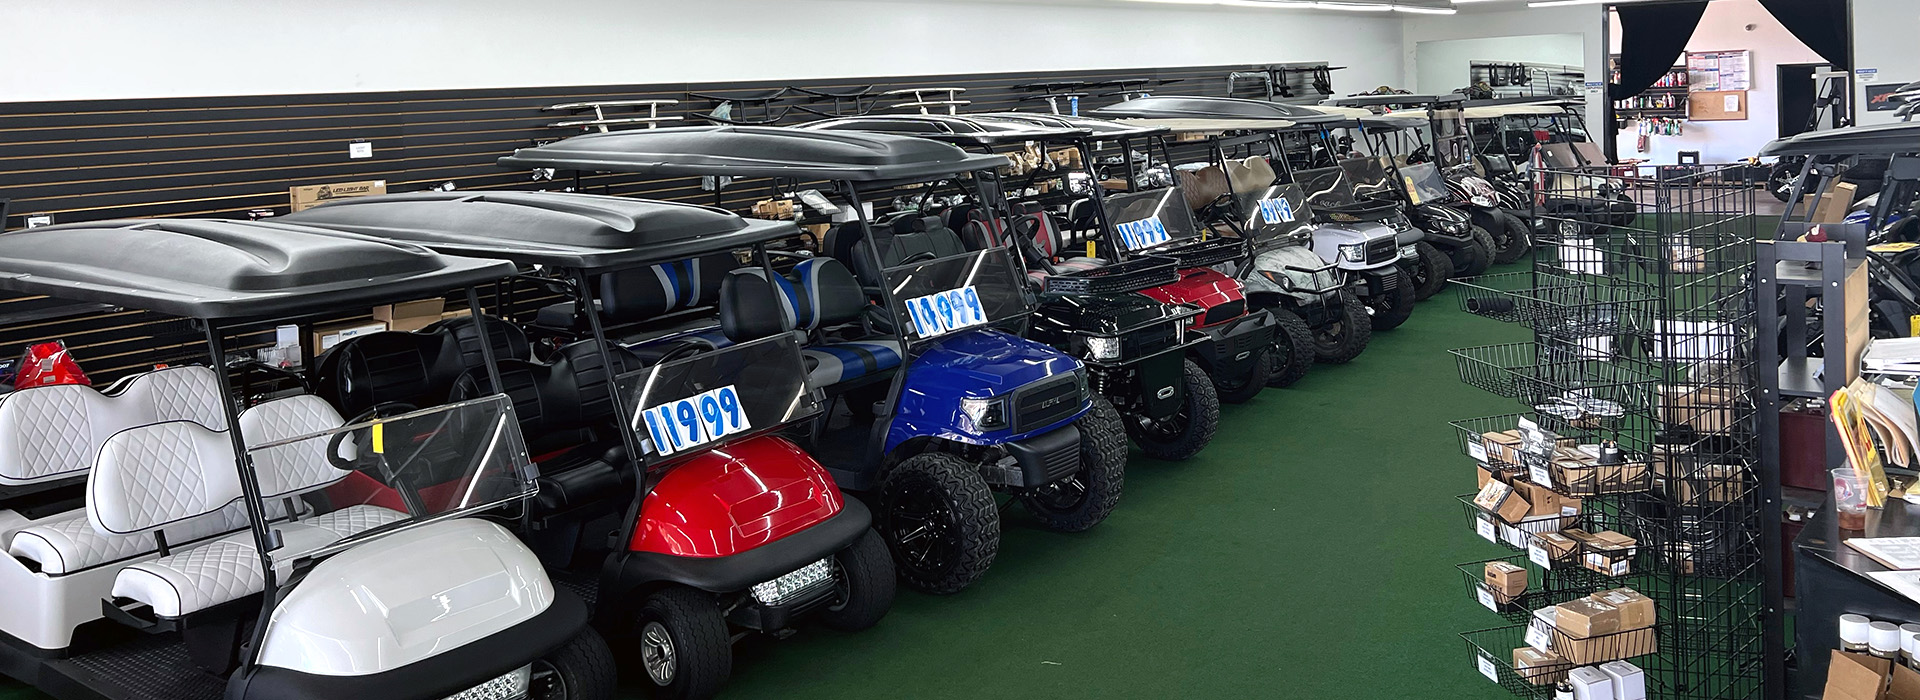 Tidewater_Carts_Golf_Cart_Superstore_04-22